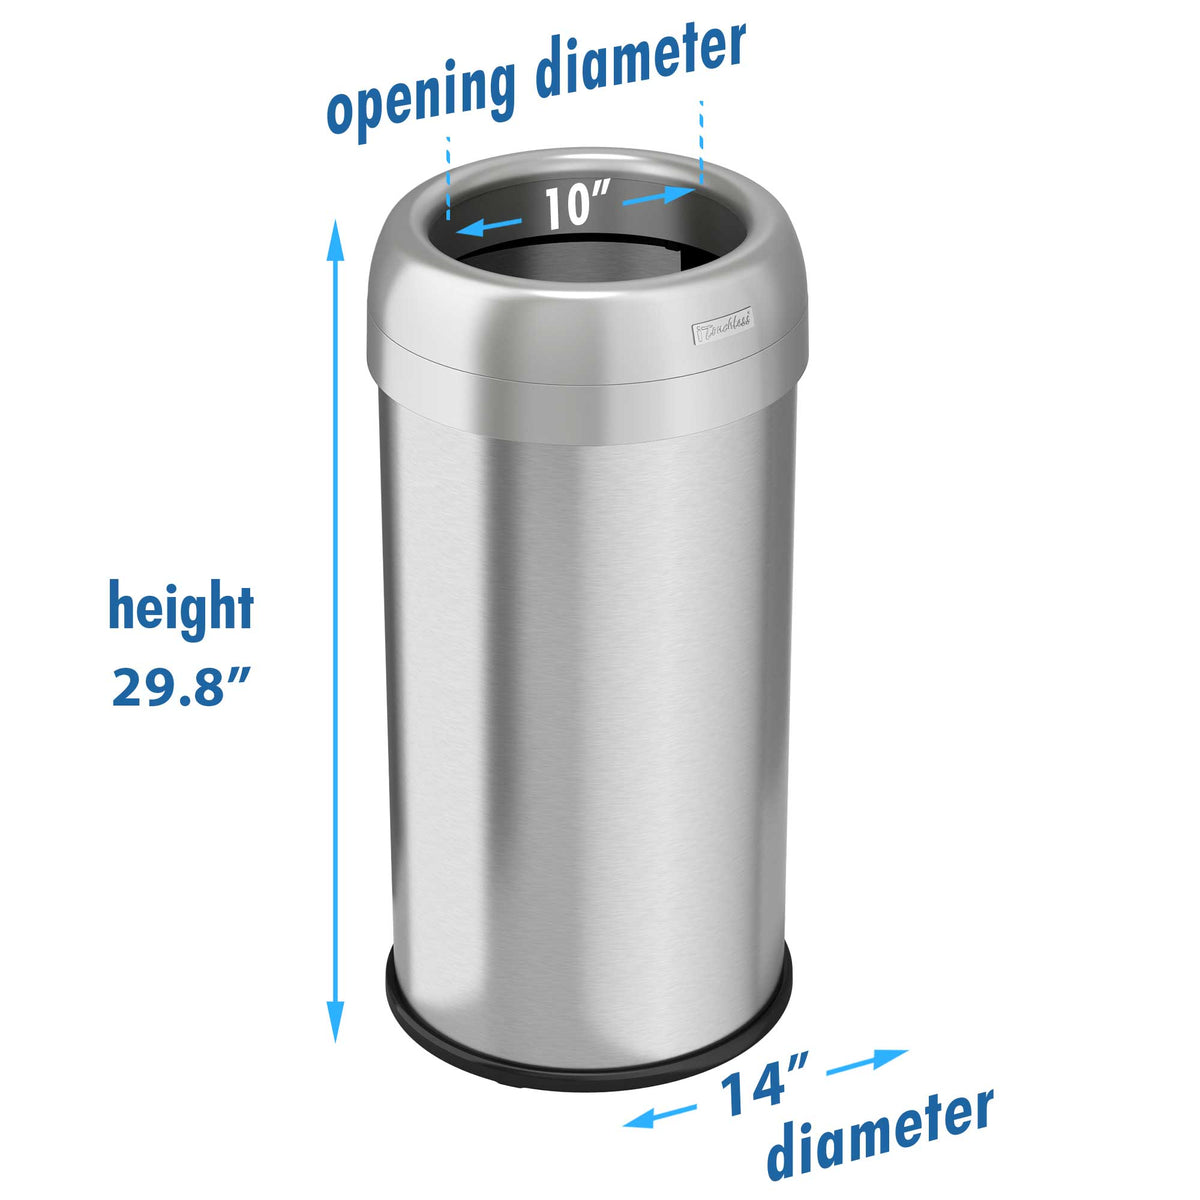 16 Gallon / 60 Liter Round Open Top Trash Can dimensions